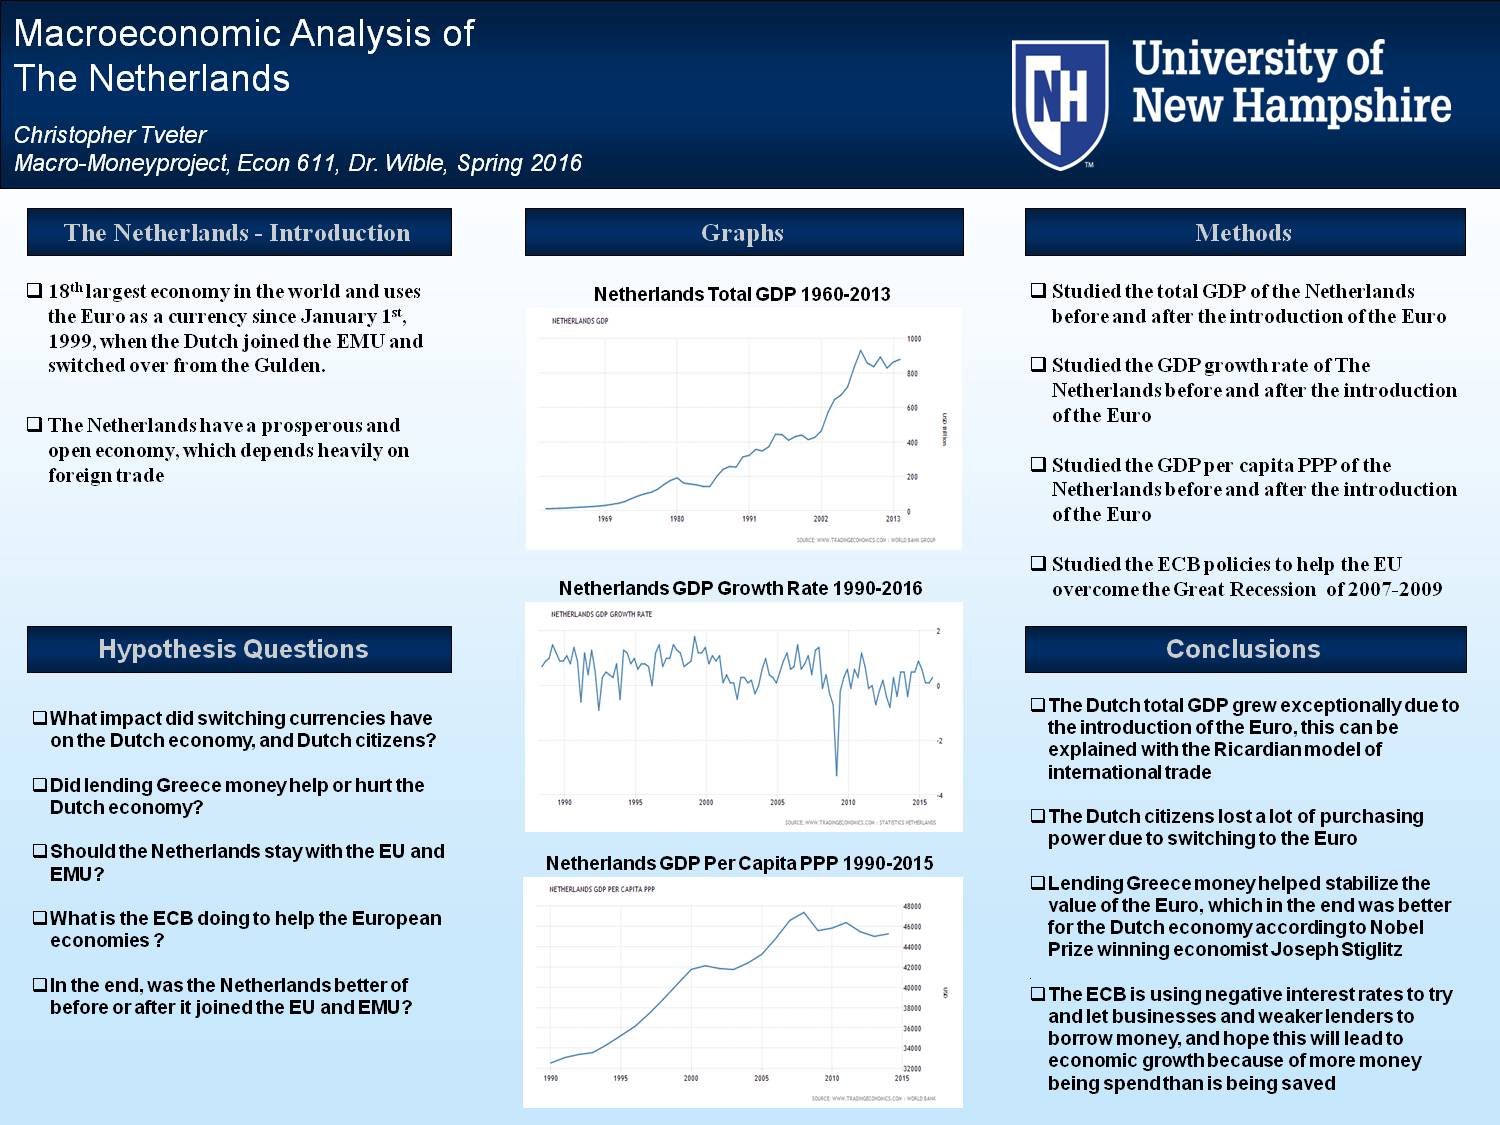 Macroeconomics Analysis Of The Netherlands By Chris Tveter by christveter